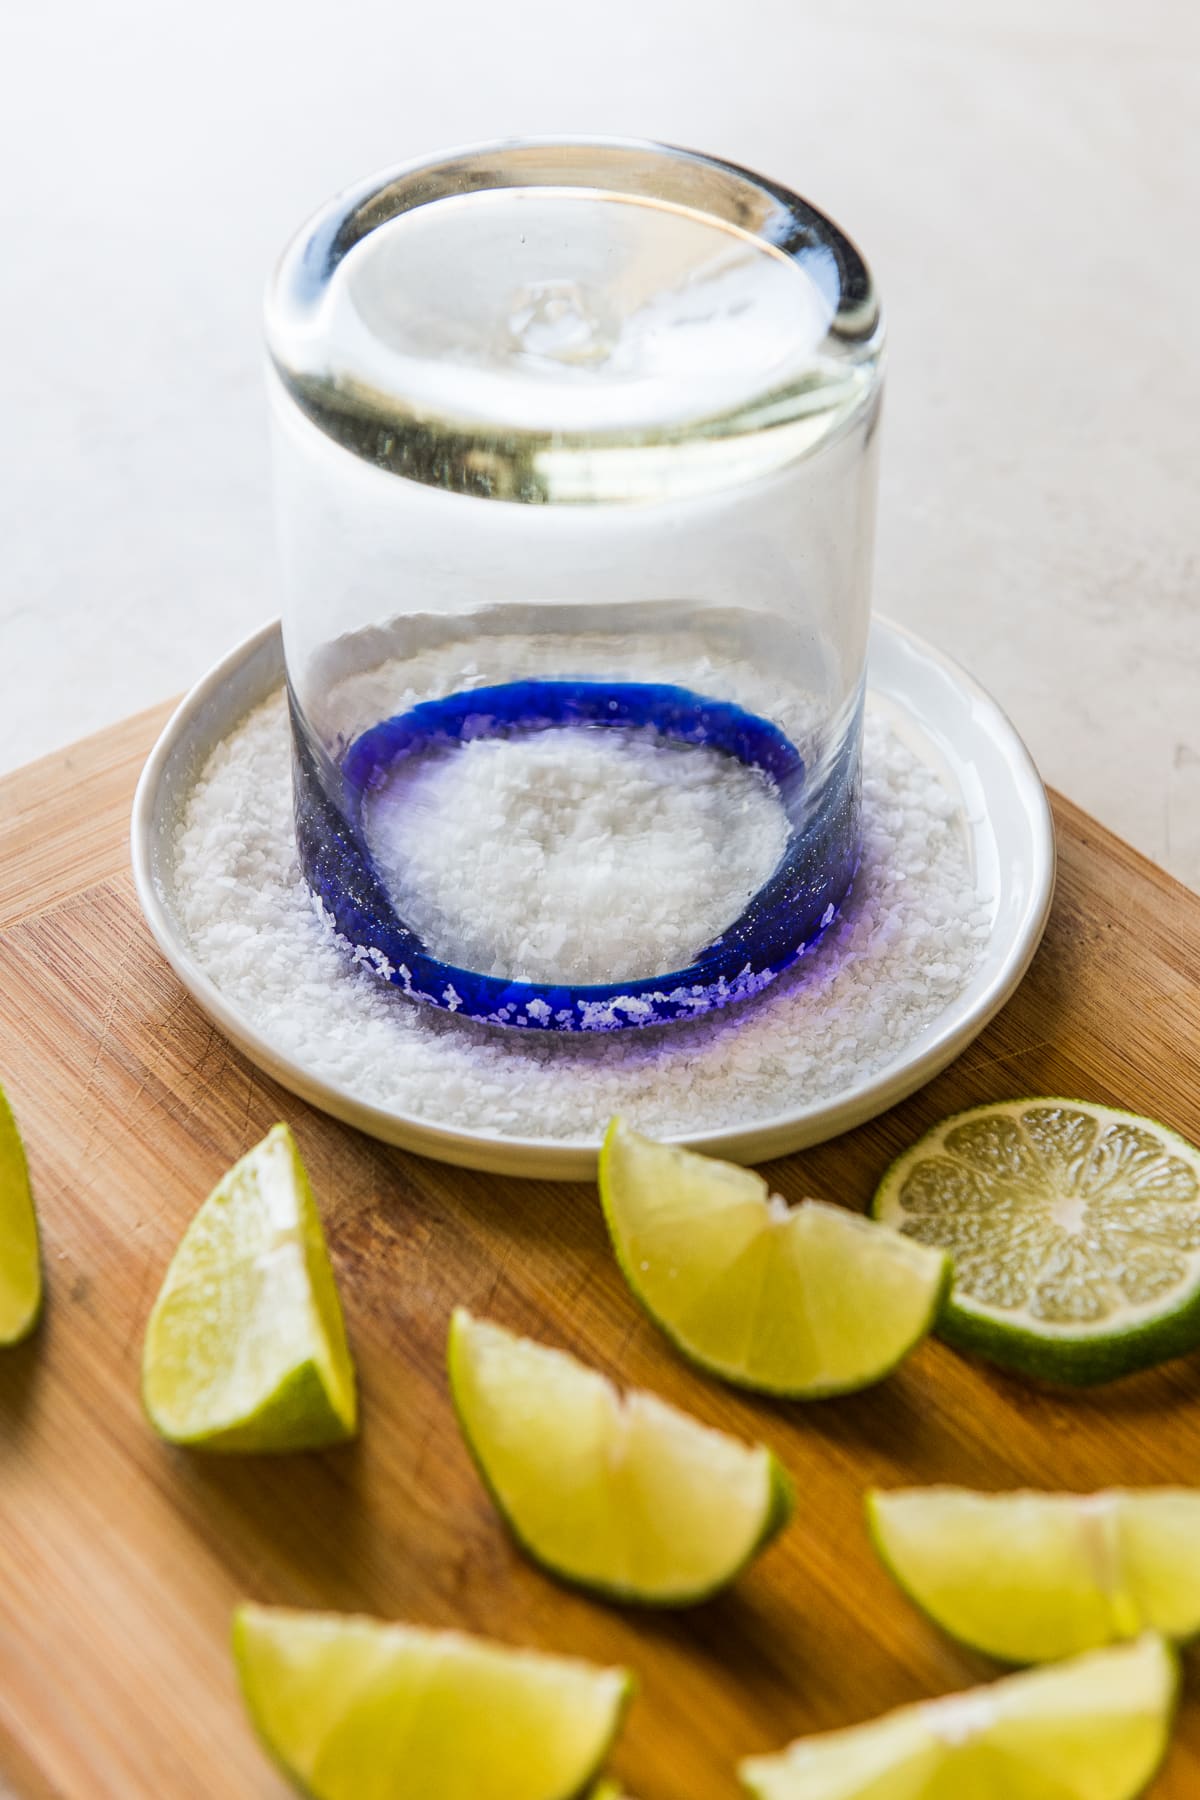 A blue-rimmed margarita glass being dipped in salt and lime juice.